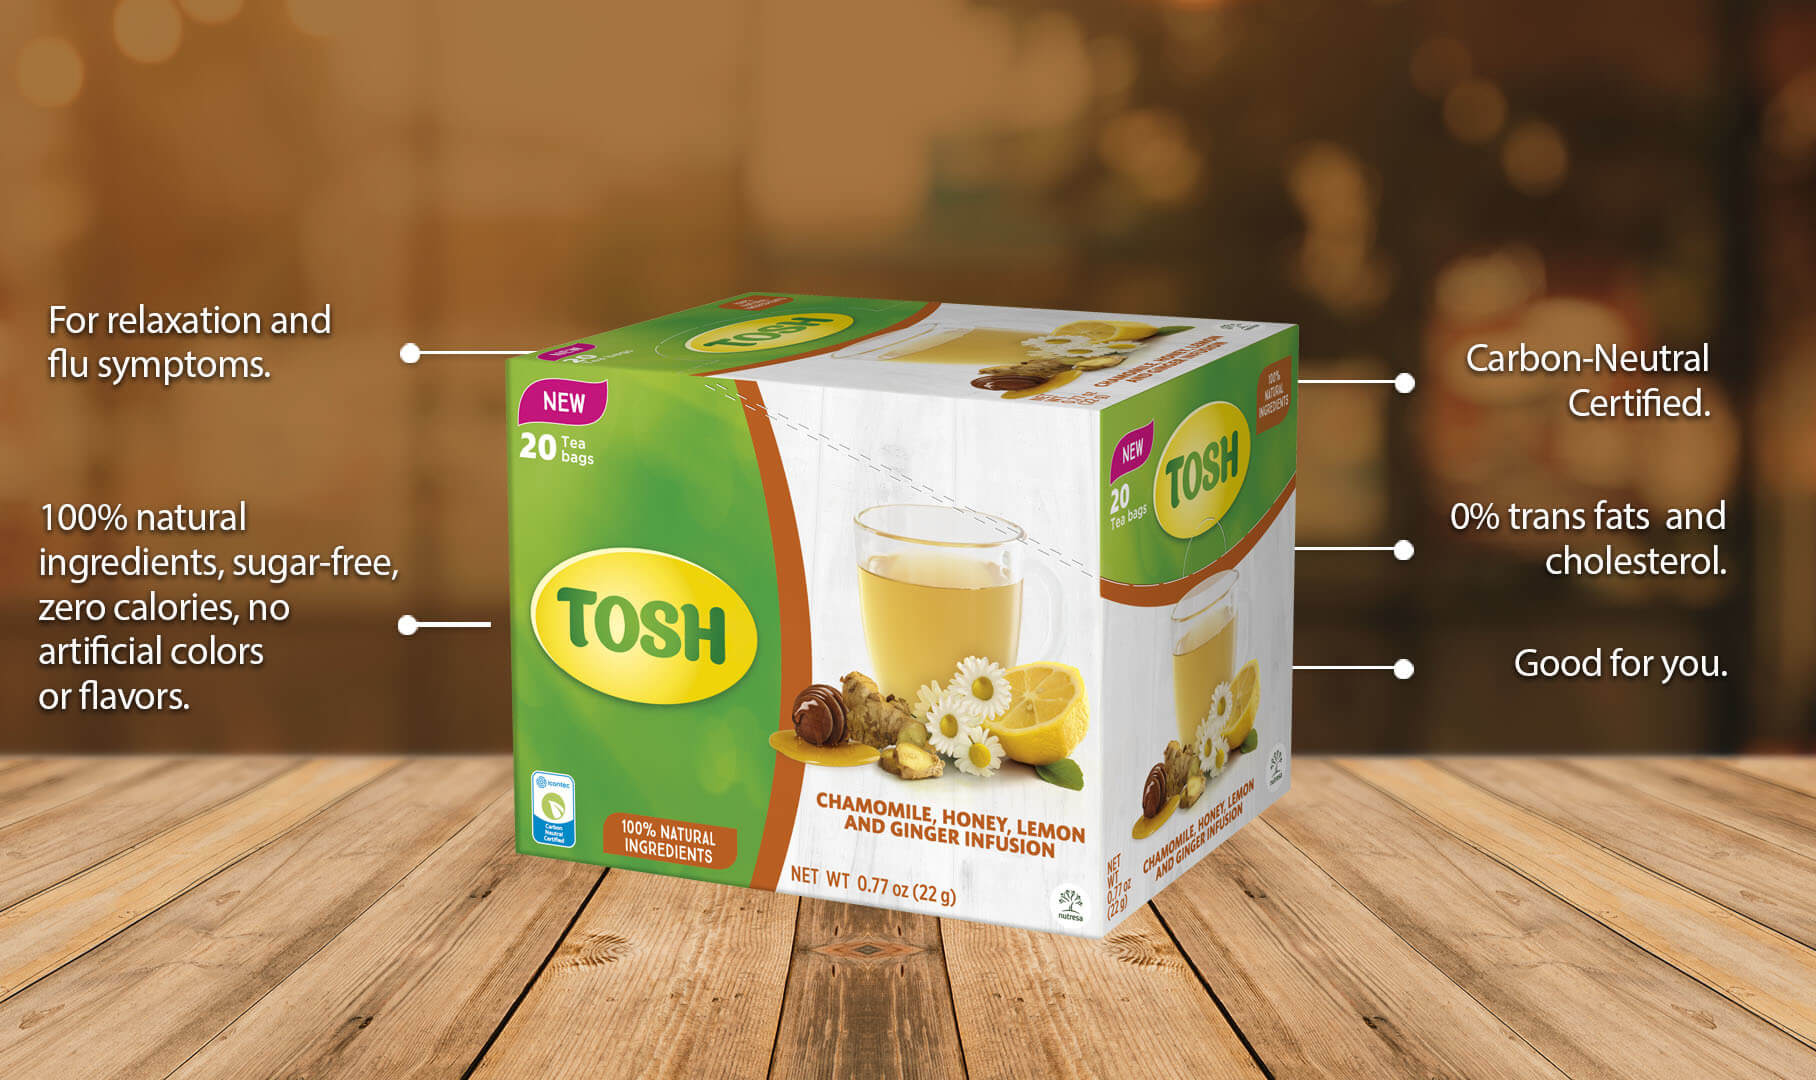 Tosh Chamomile, Honey, Lemon and Ginger Infusion, 0.77 Oz, Box with 20 Tea bags